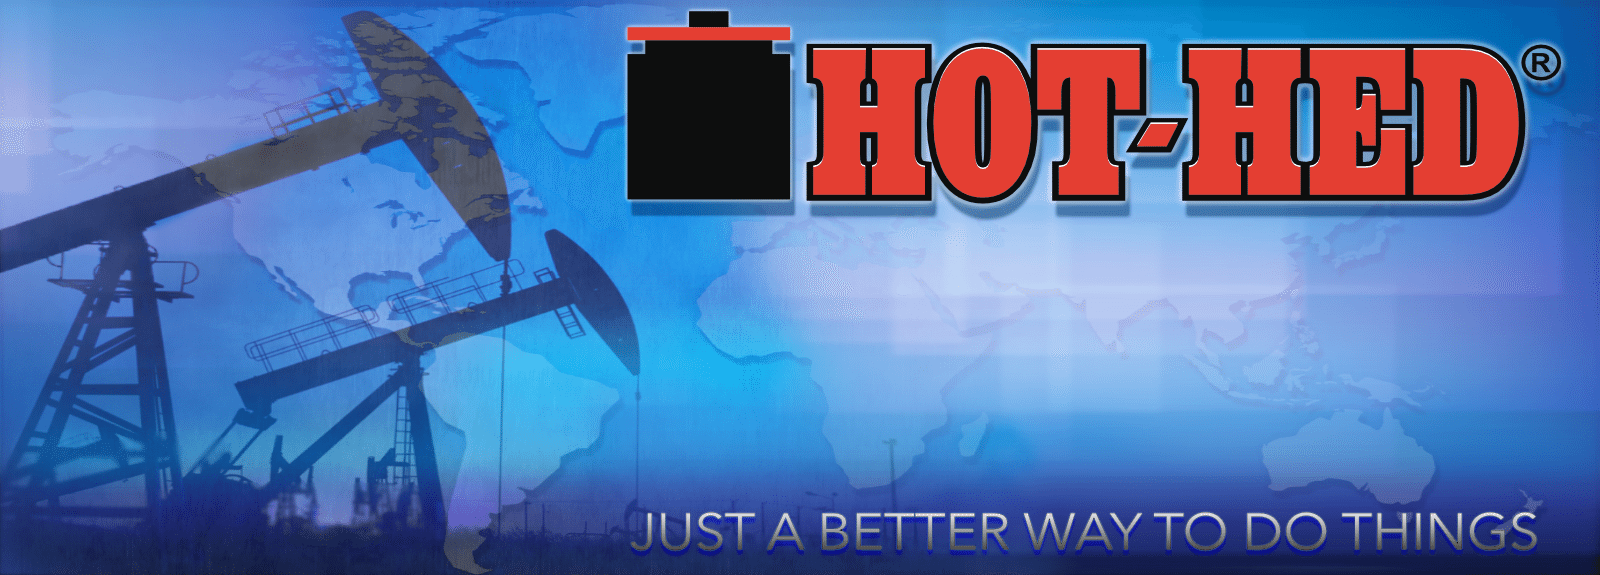 Hot-Hed® International Worlwide Locations & Contact Info